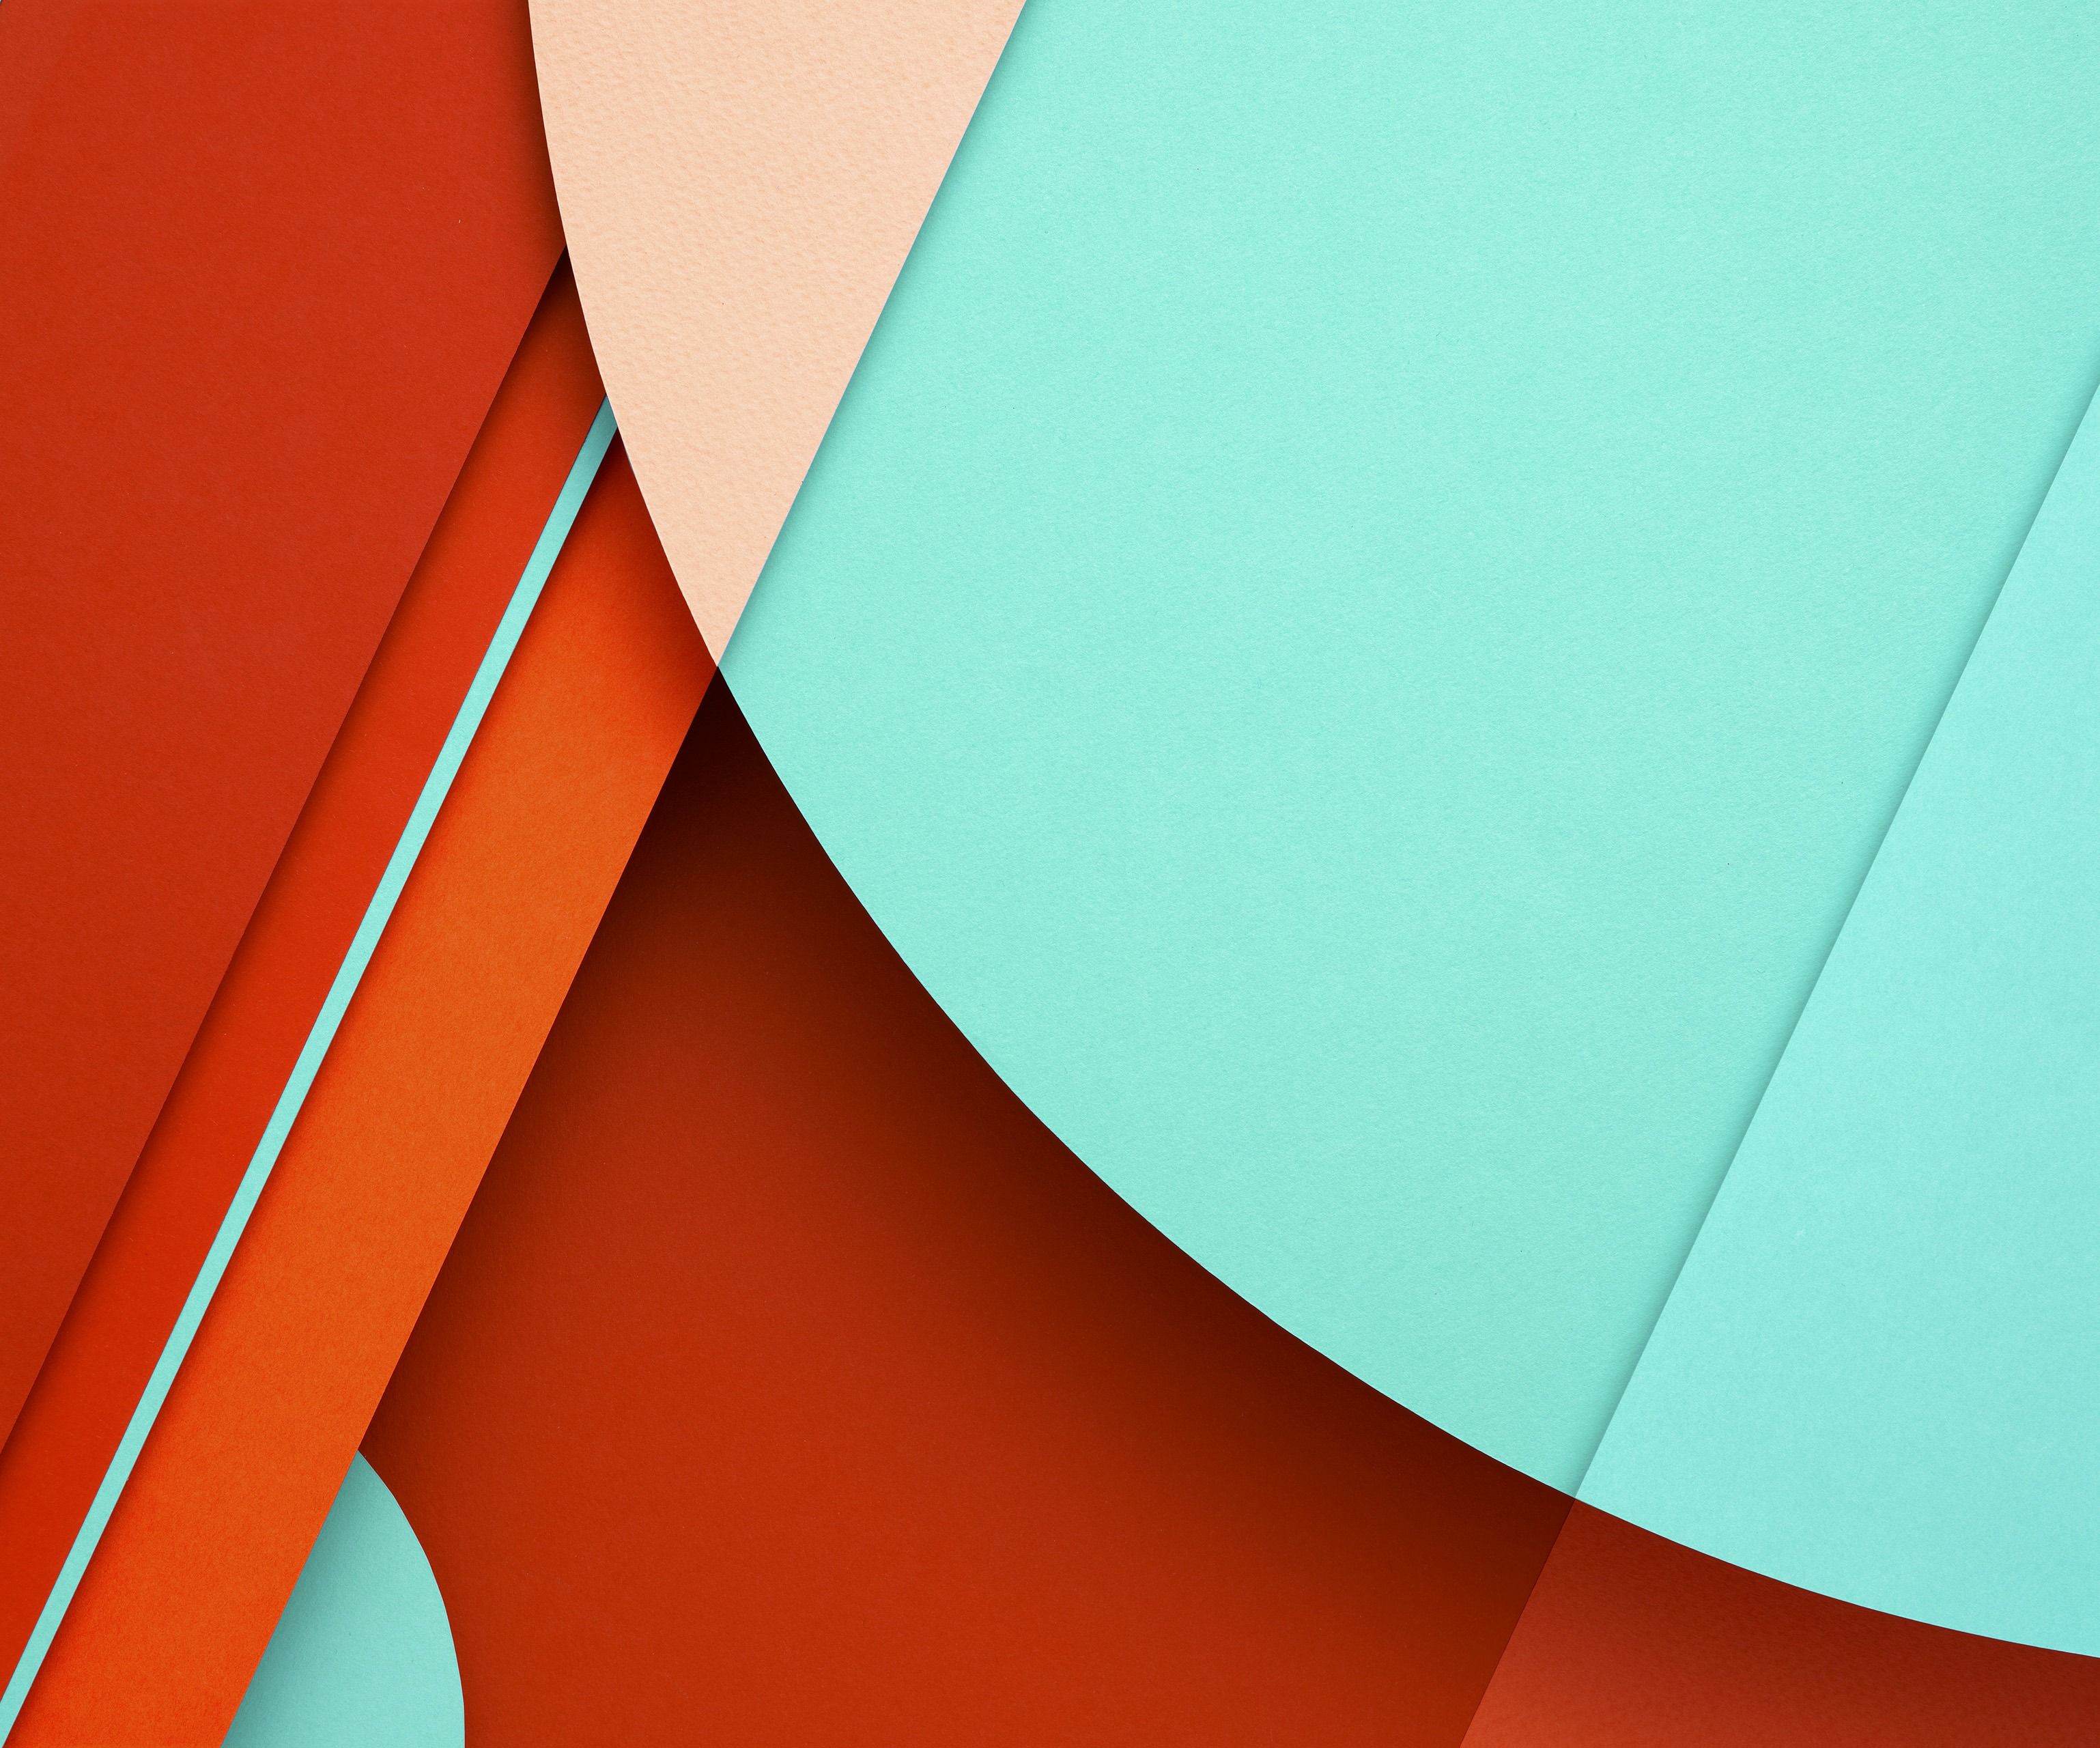 Android 5.0 Lollipop wallpapers see the full pack here